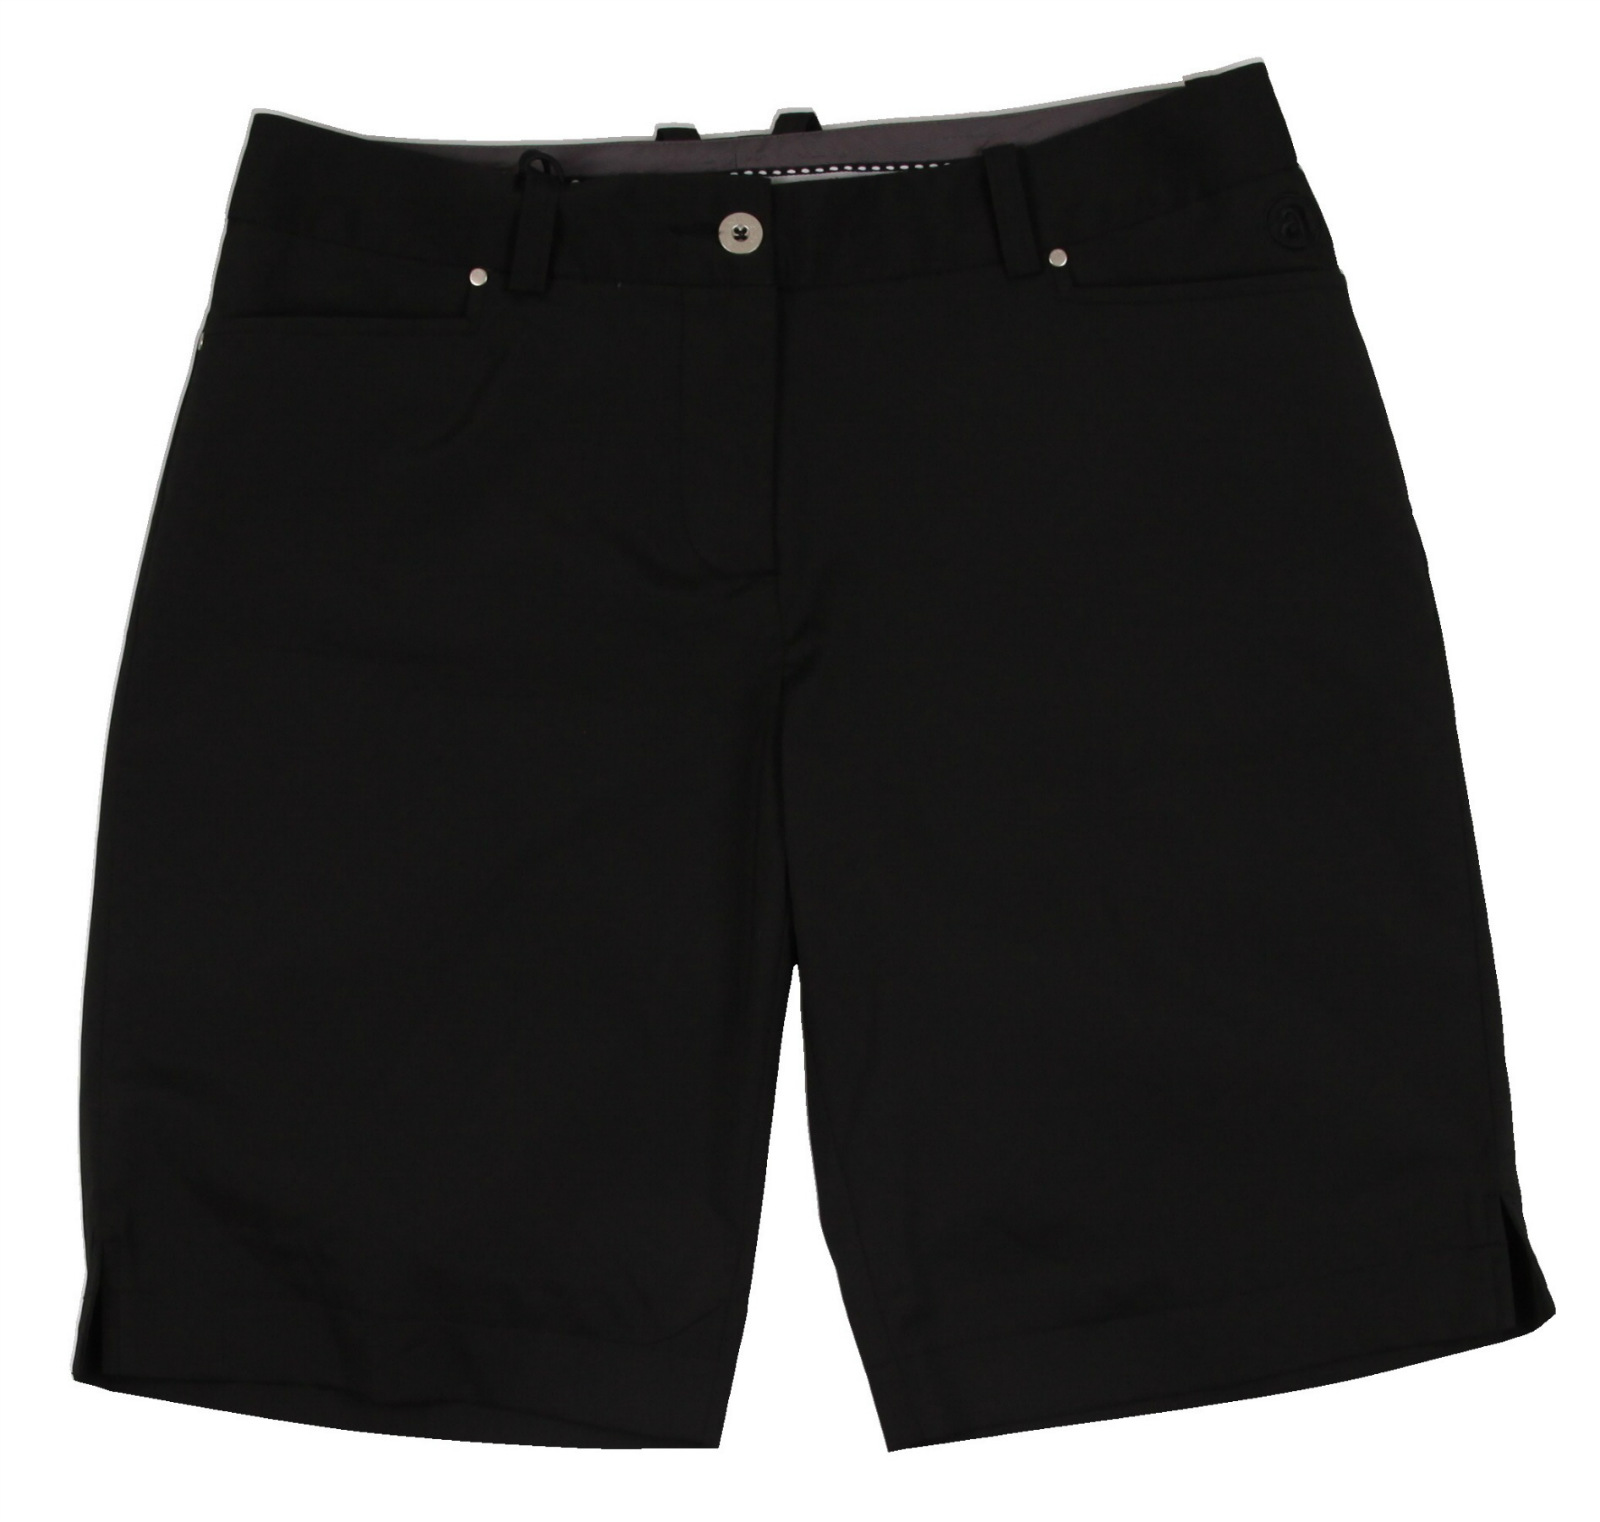 New Women's Abacus Cleek Knee Length Golf Shorts Solid Black US Size 8